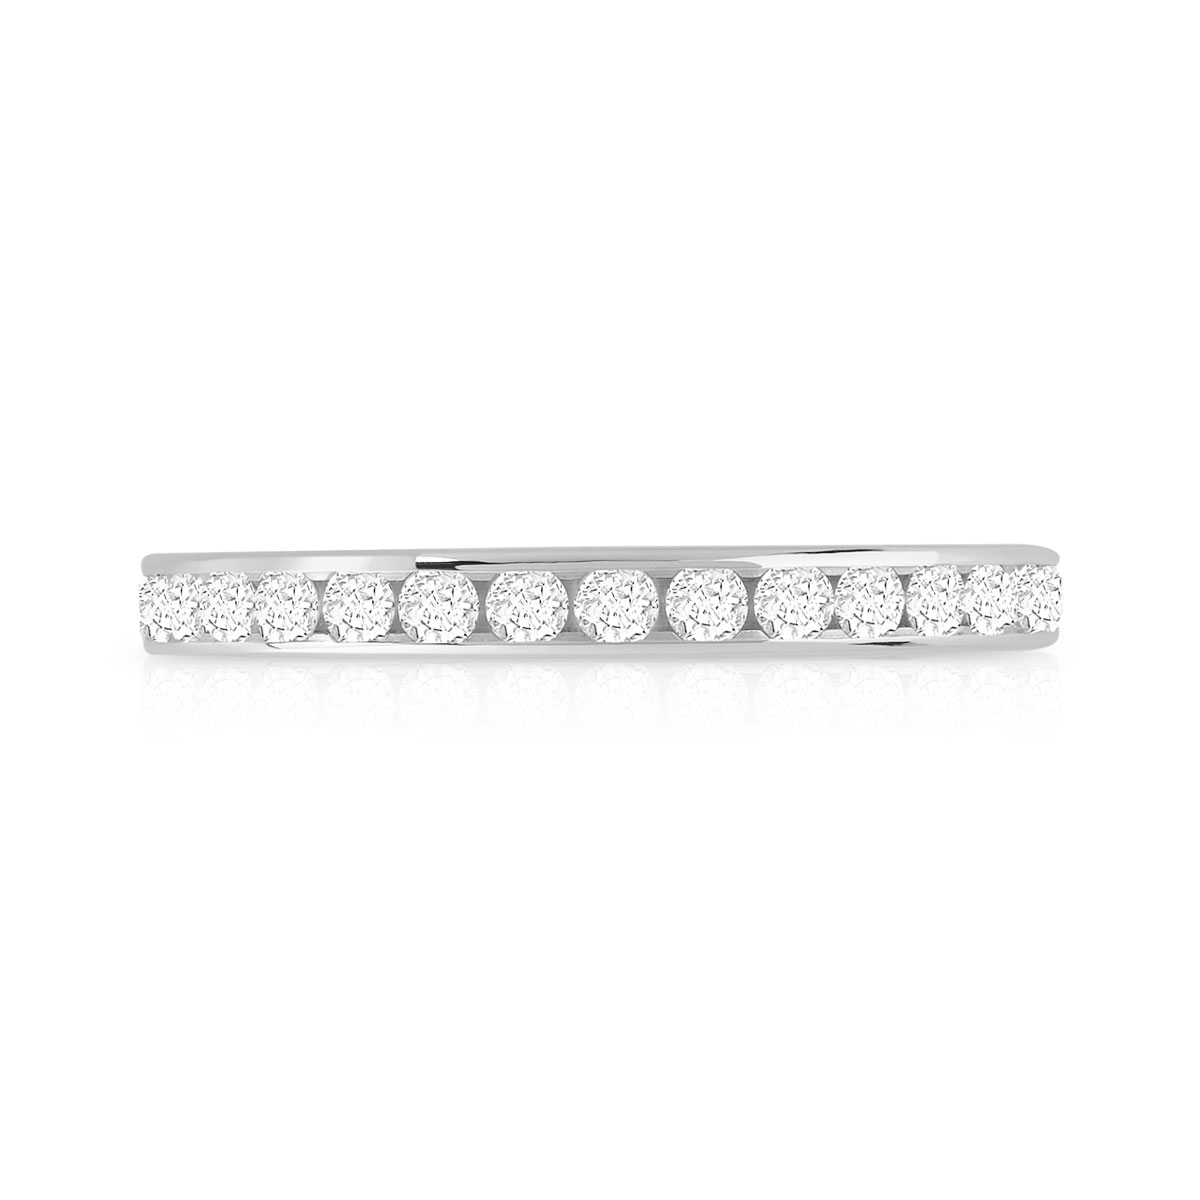 Alliance or 750 blanc diamants synthétiques 0.75ct - vue 3